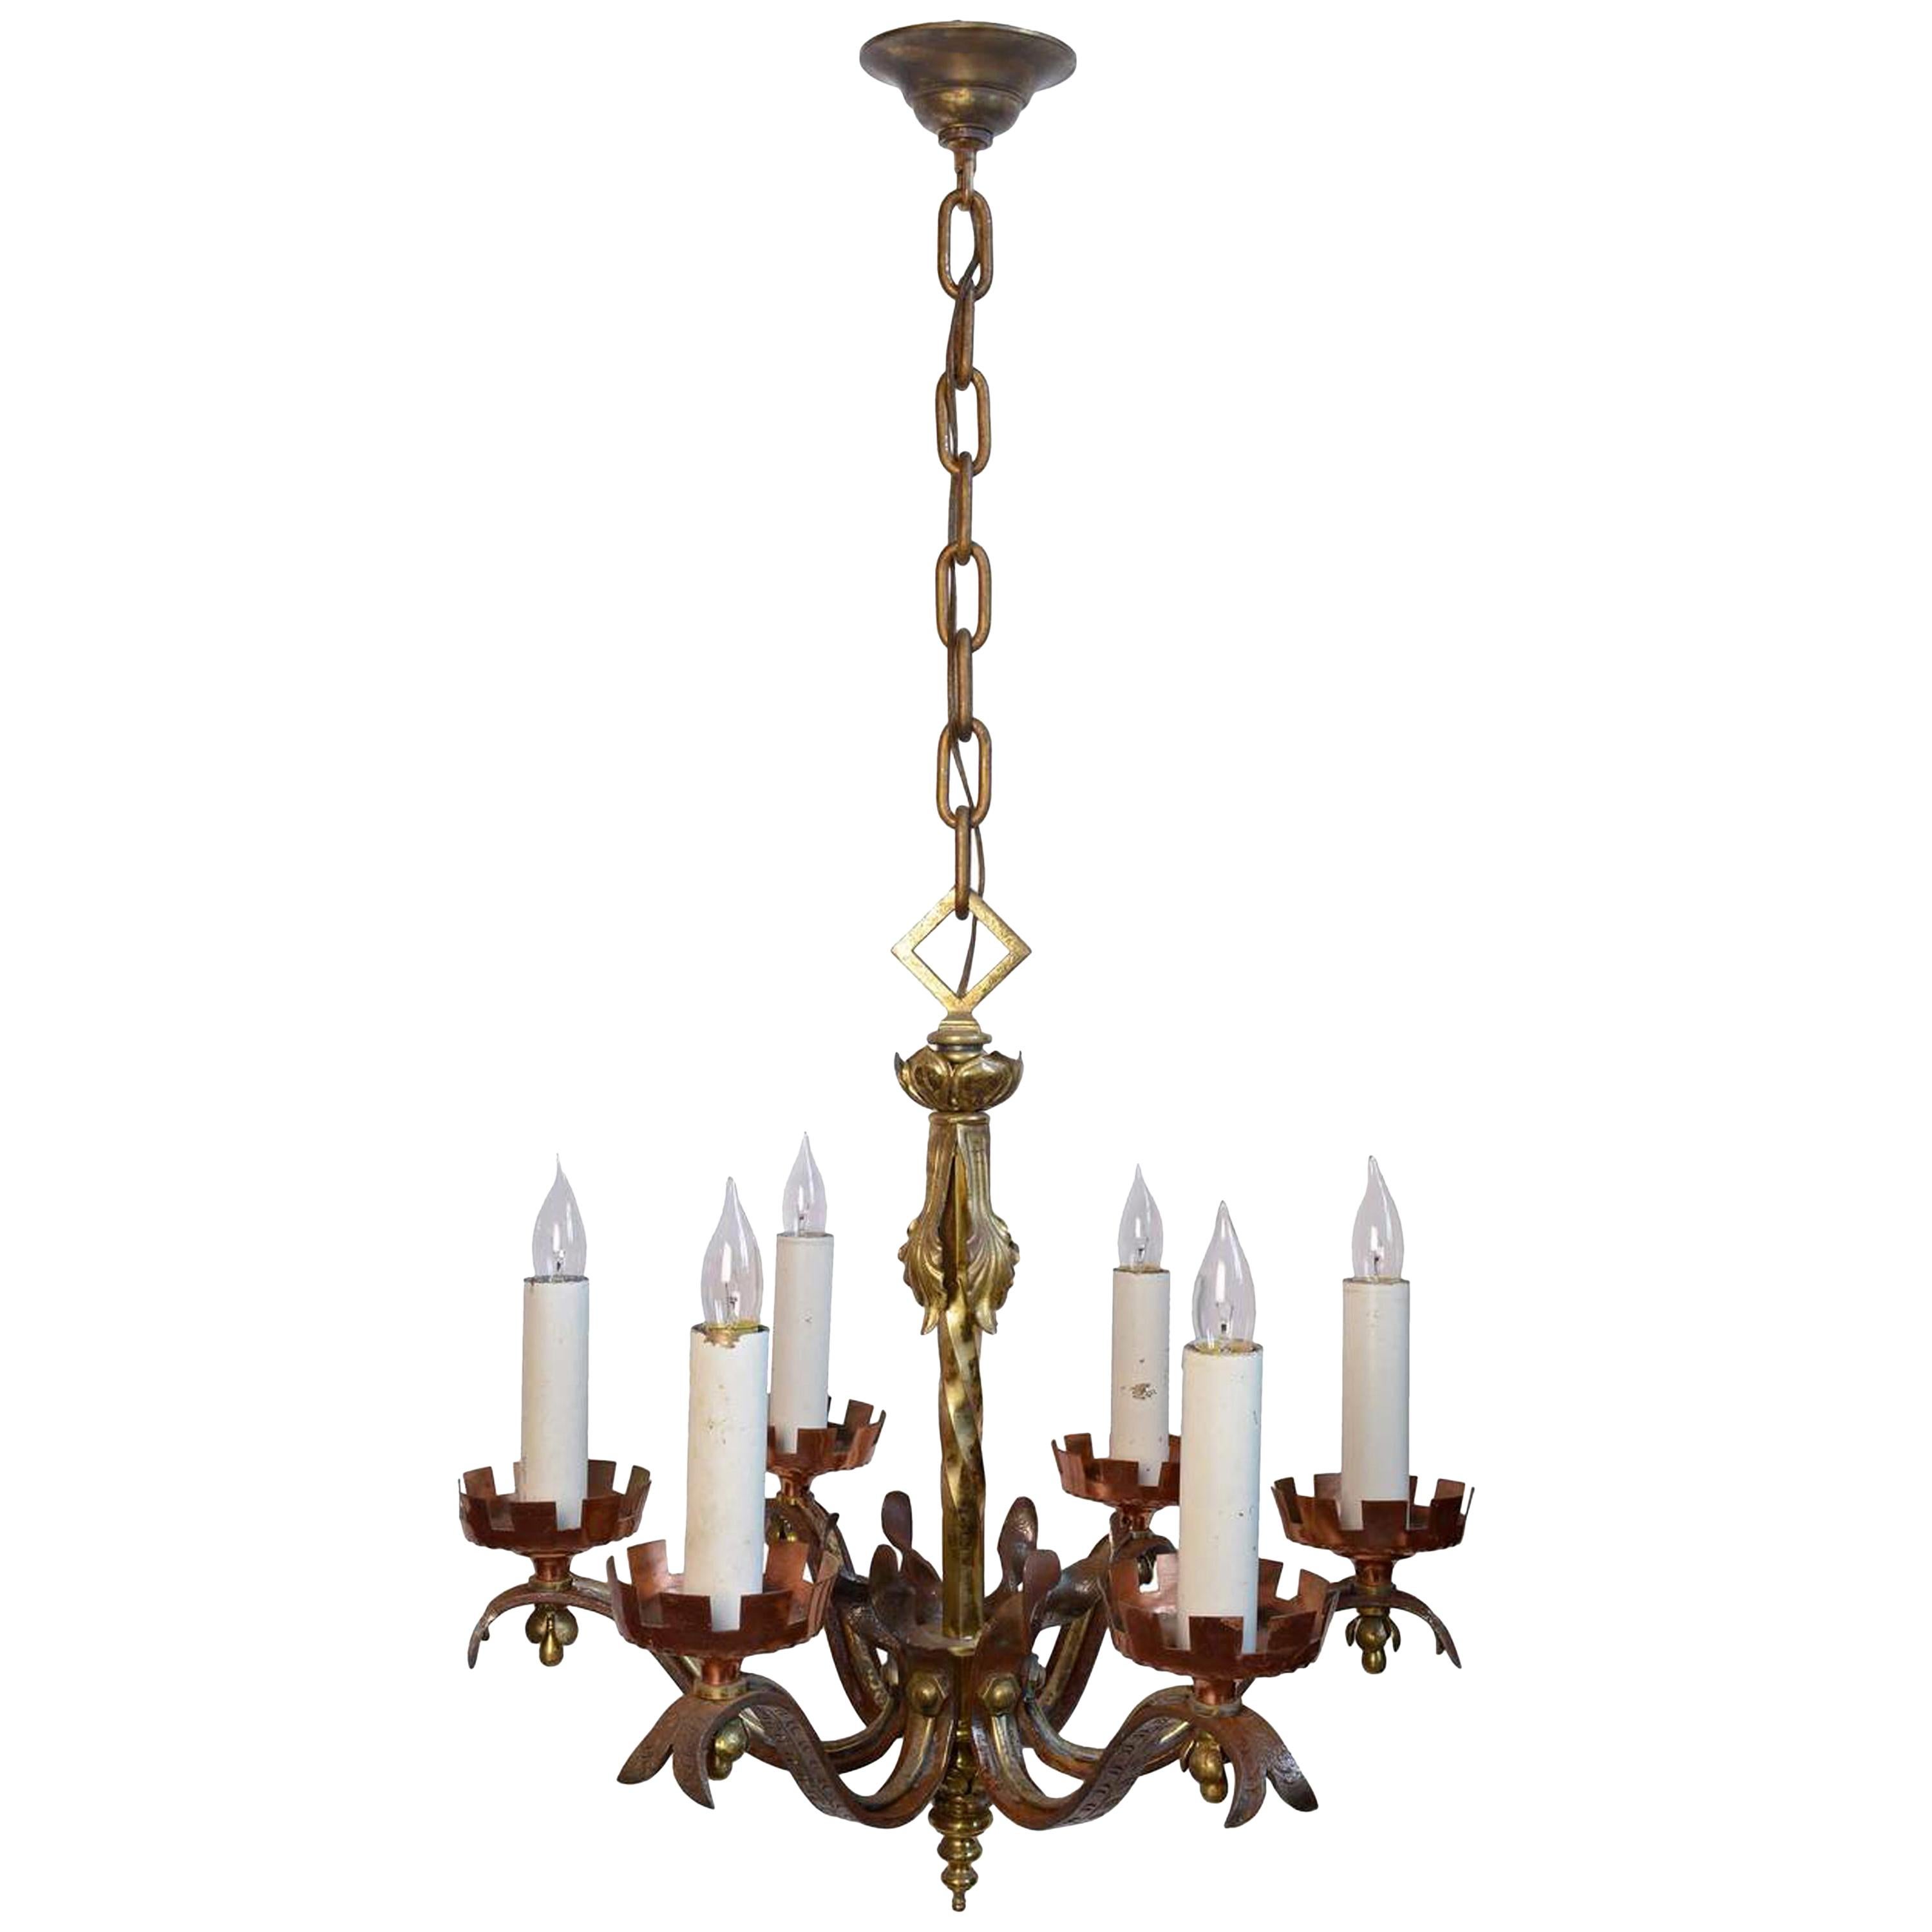 Six Candle Copper, Brass and Iron Gothic Revival Chandelier For Sale